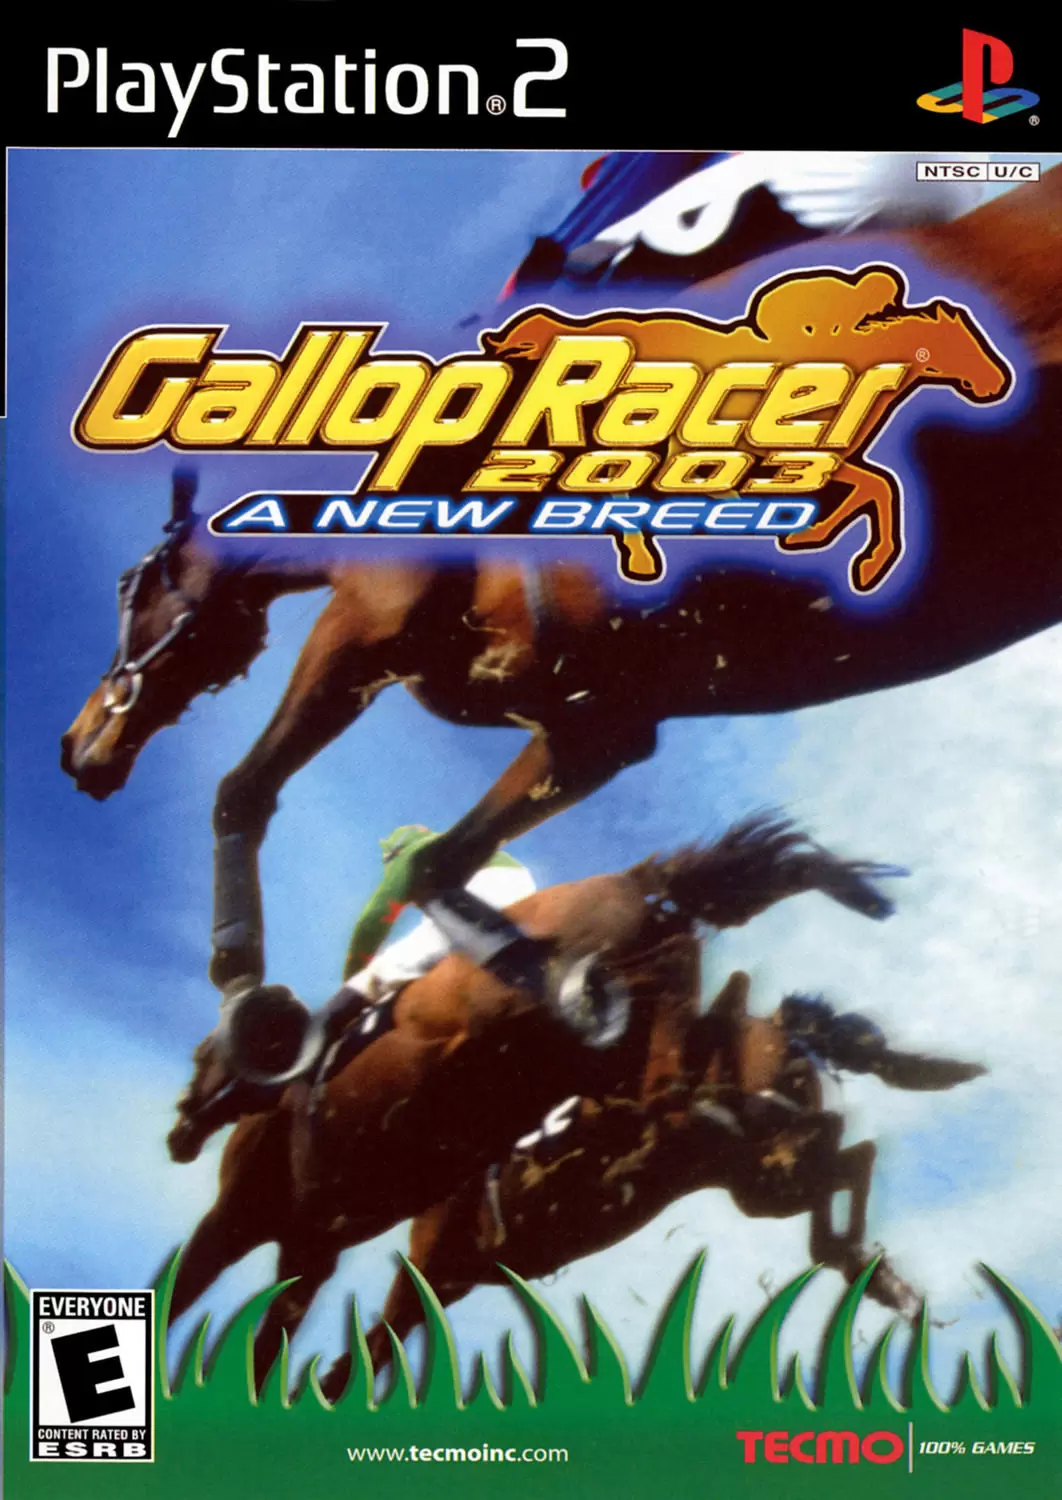 PS2 Games - Gallop Racer 2003